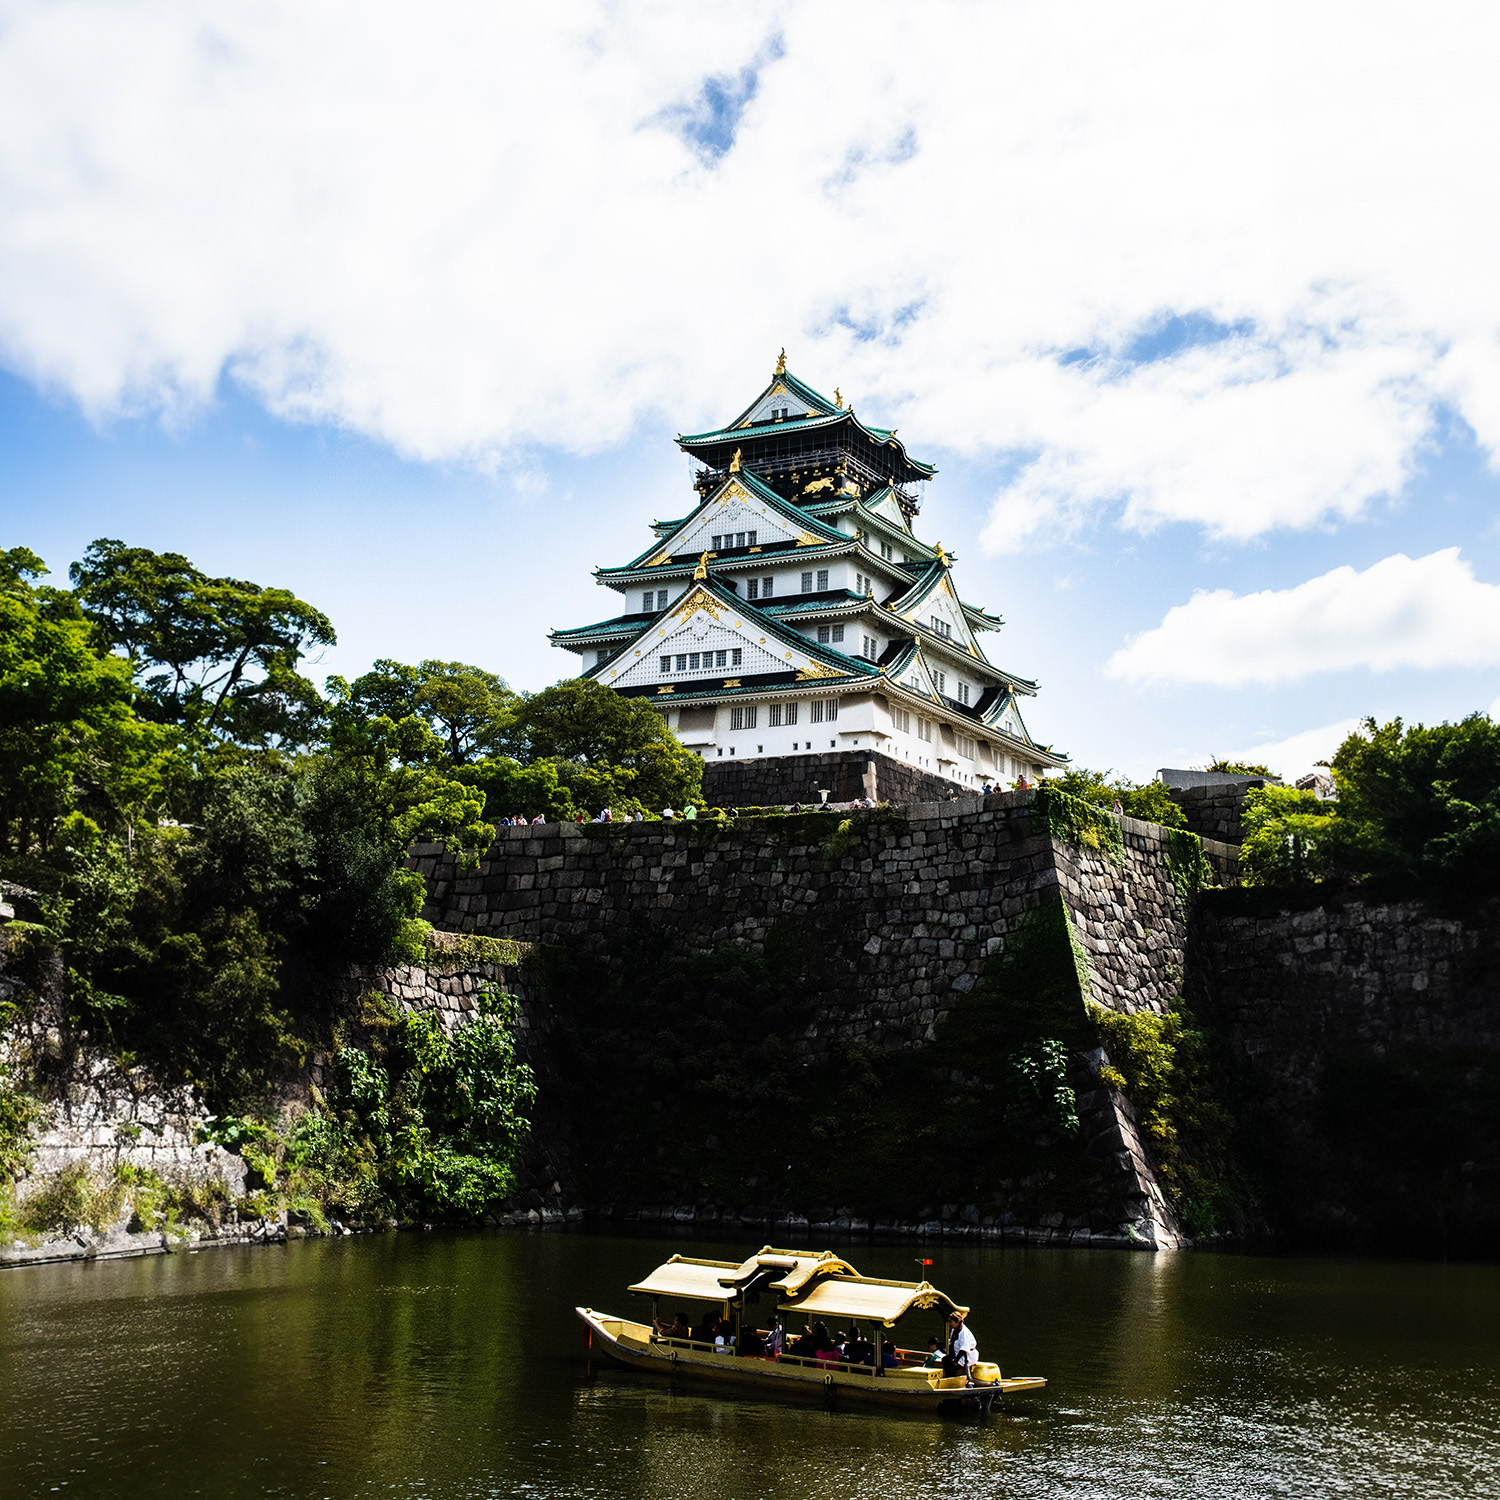 Discover the most beautiful Japanese castles